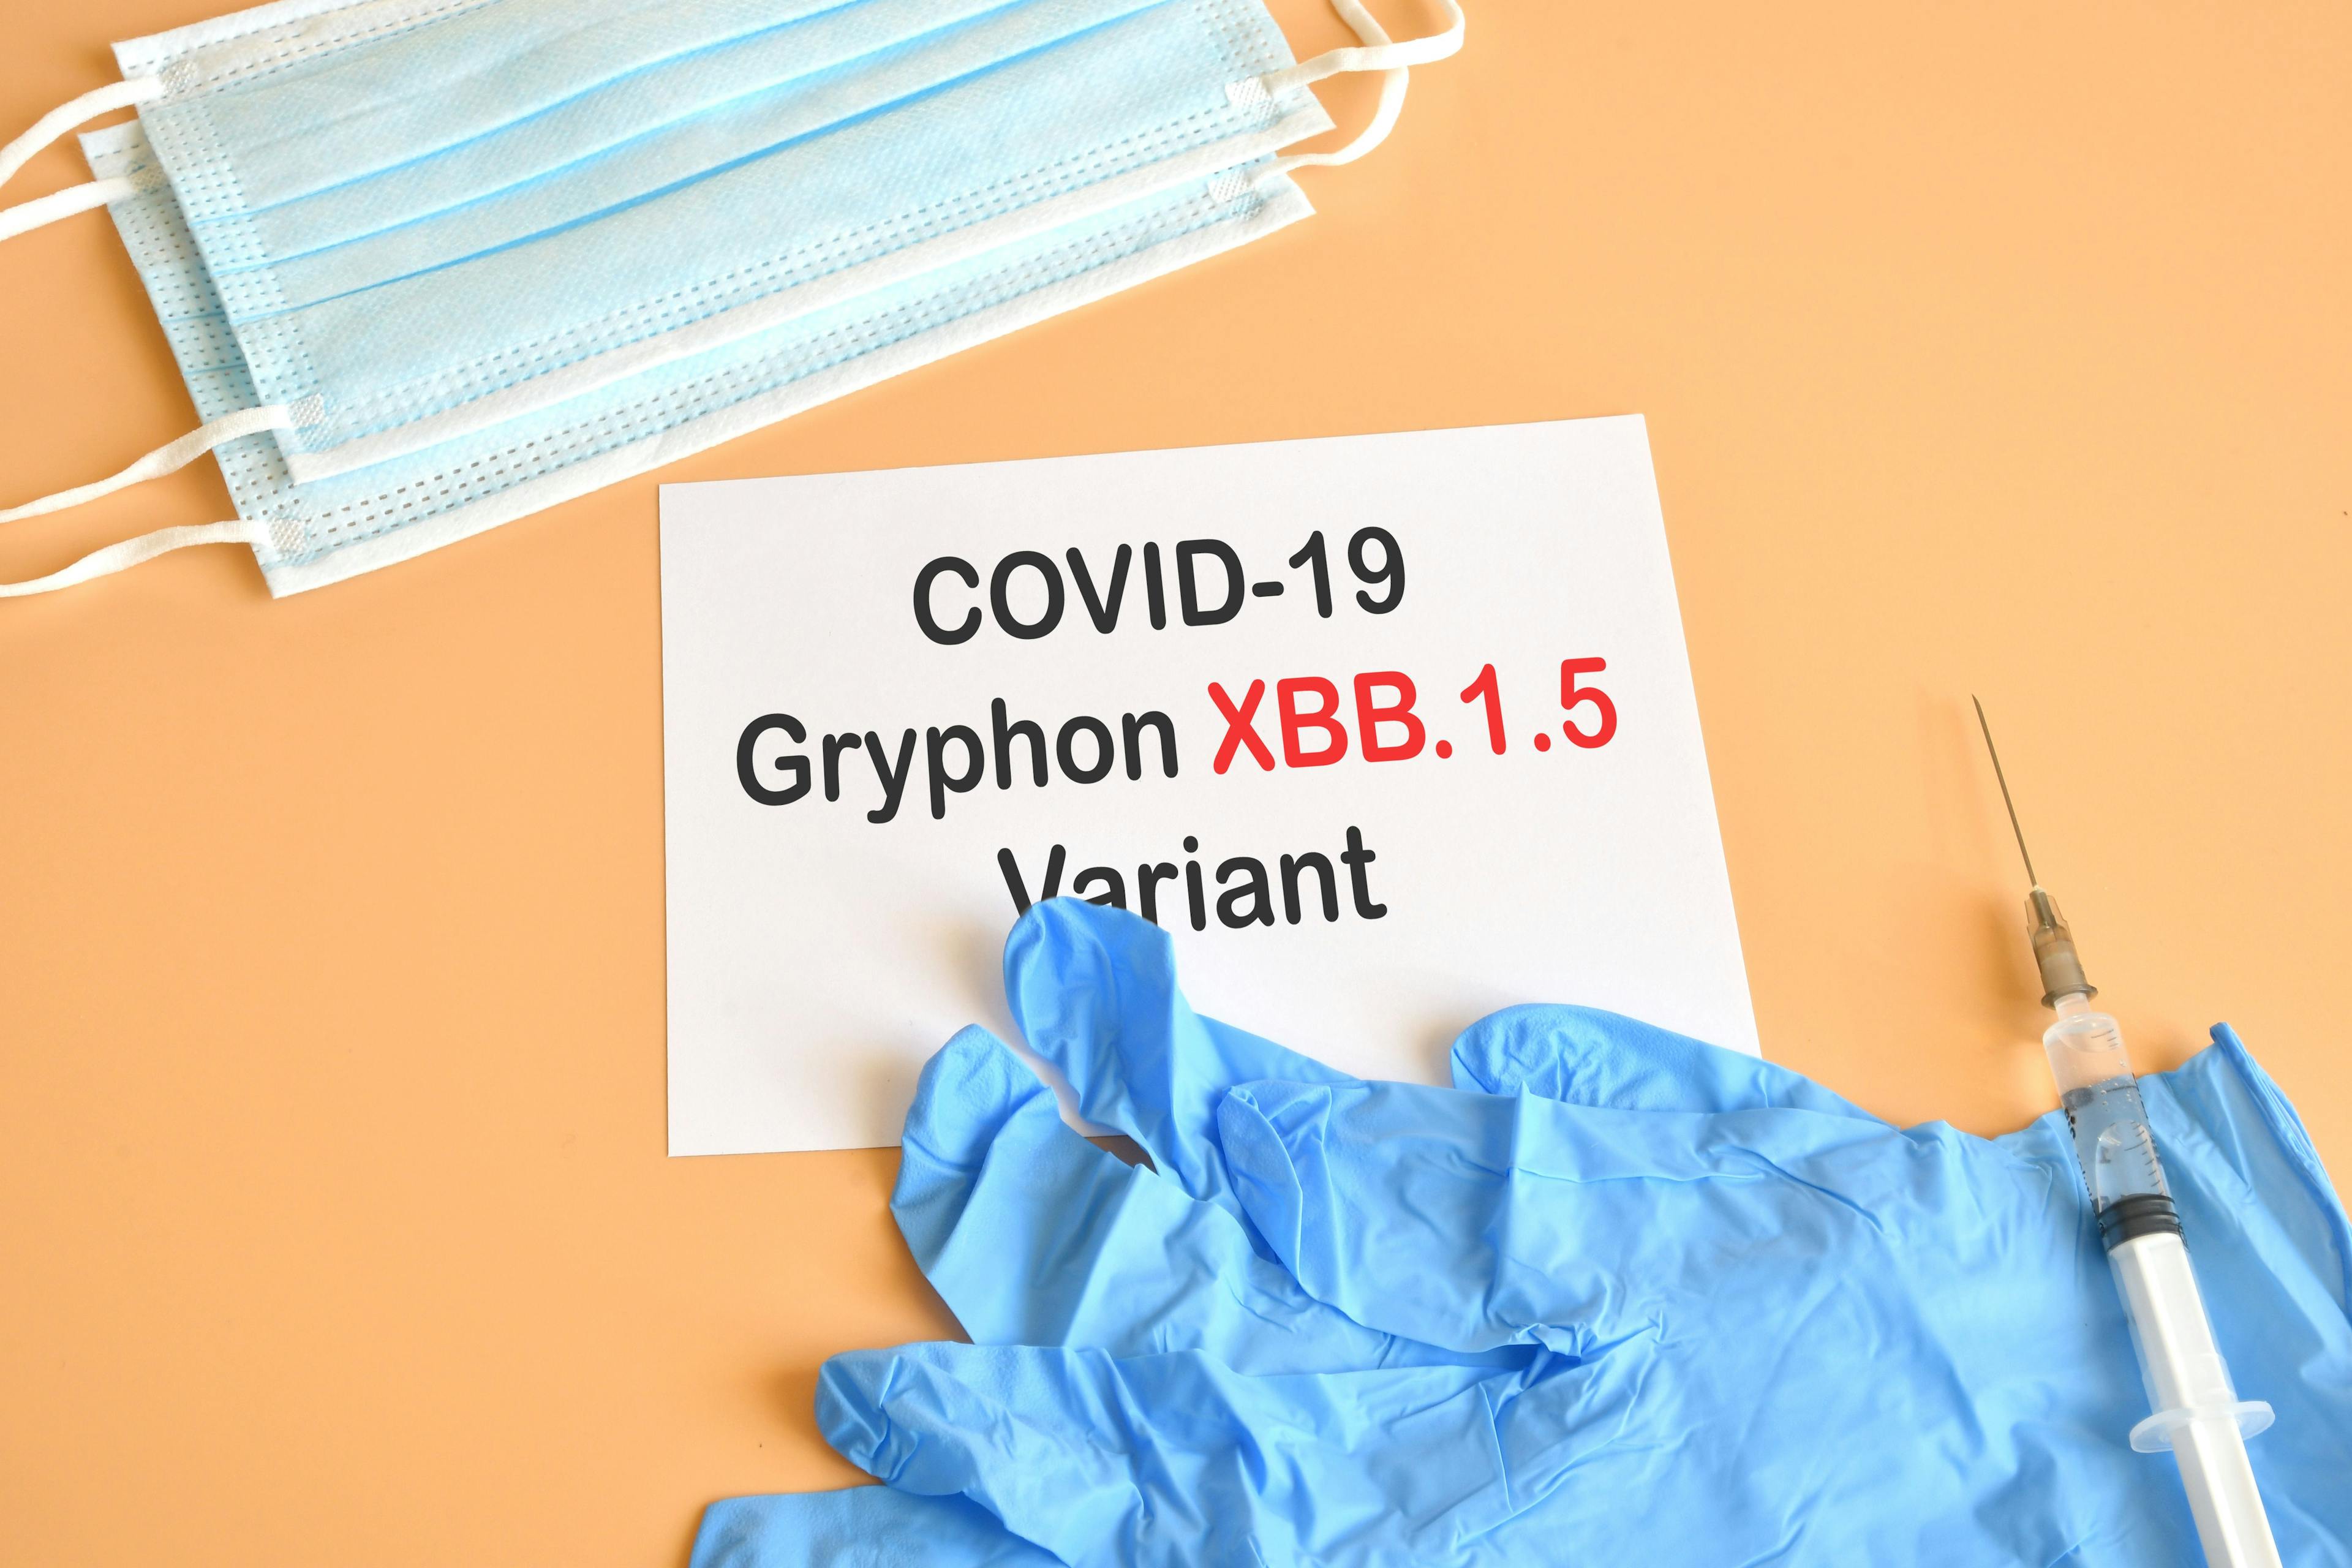 In just a month, the XBB.1.5 variant went from causing 1% to over 40% of new COVID-19 infections.